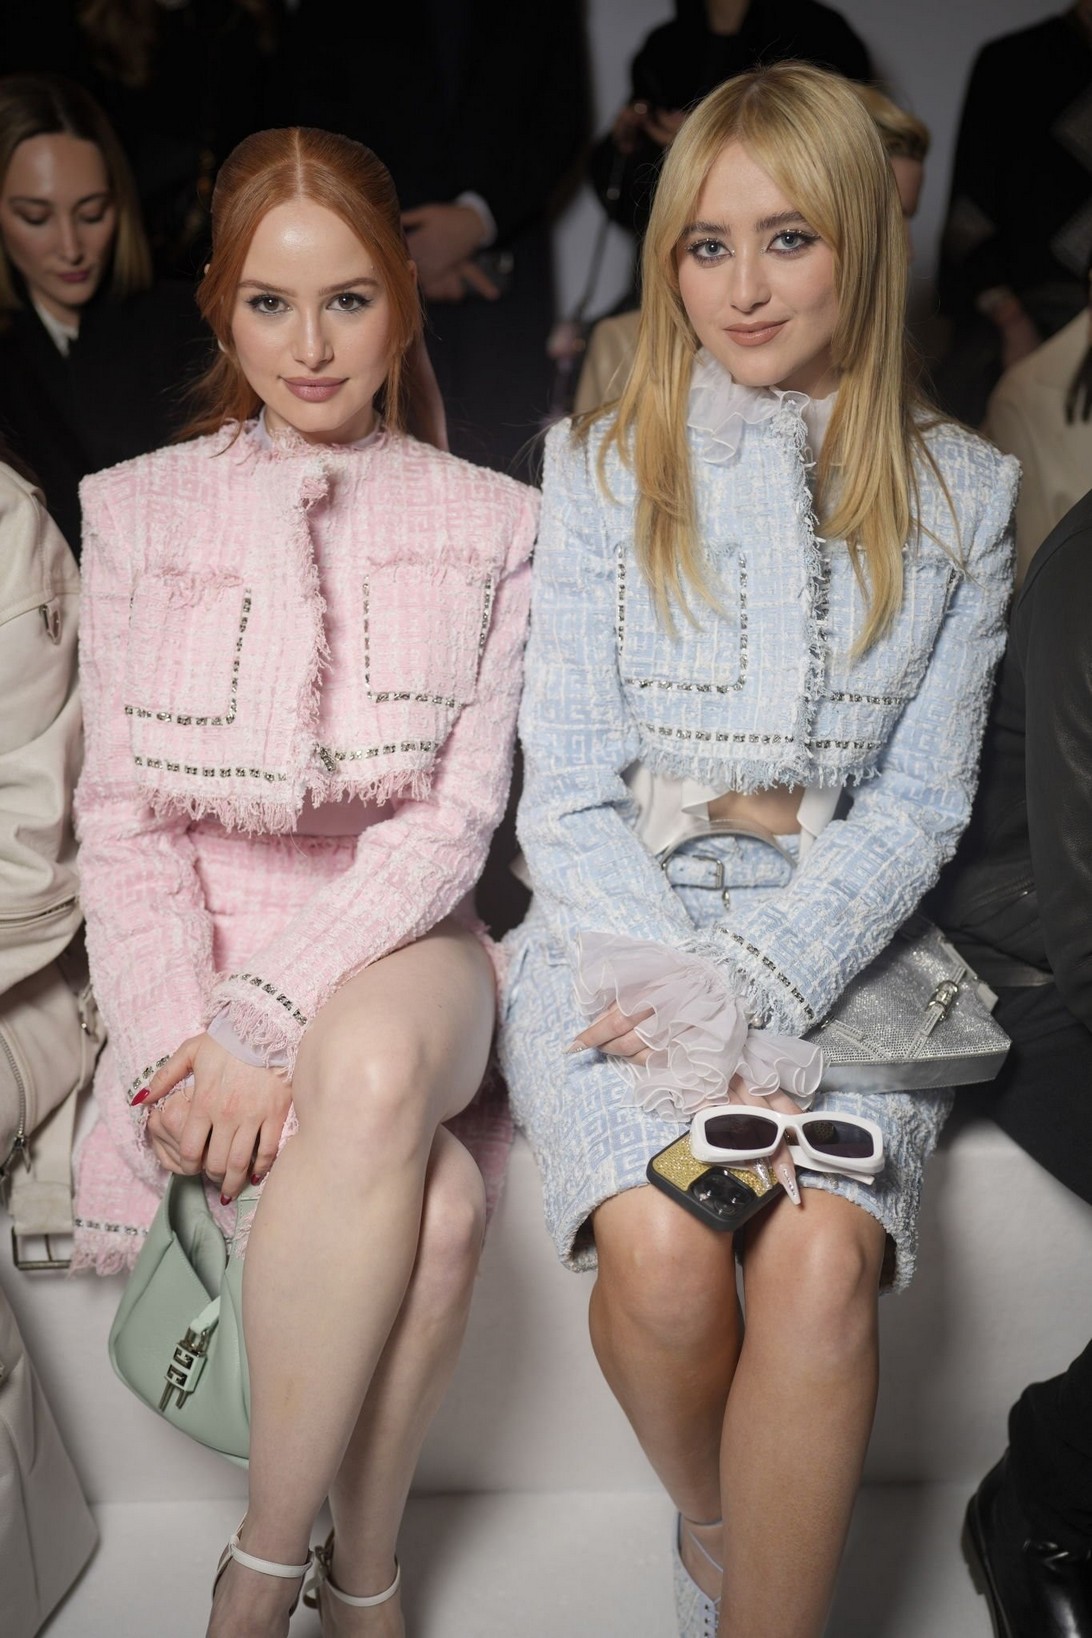 At the Givenchy fashion show during Paris Fashion Week, Madelaine Petsch shocked attendees with her bold and daring outfit choice. What seemed like a cute and modest pink ensemble quickly turned heads as she revealed a scandalous surprise underneath. With just a thin, see-through top and no bra on display, Madelaine flaunted her bare chest with the jacket wide open, leaving a lasting impression on the audience. The unexpected twist added a thrilling element to the event, showcasing Petsch's fearless and confident style.